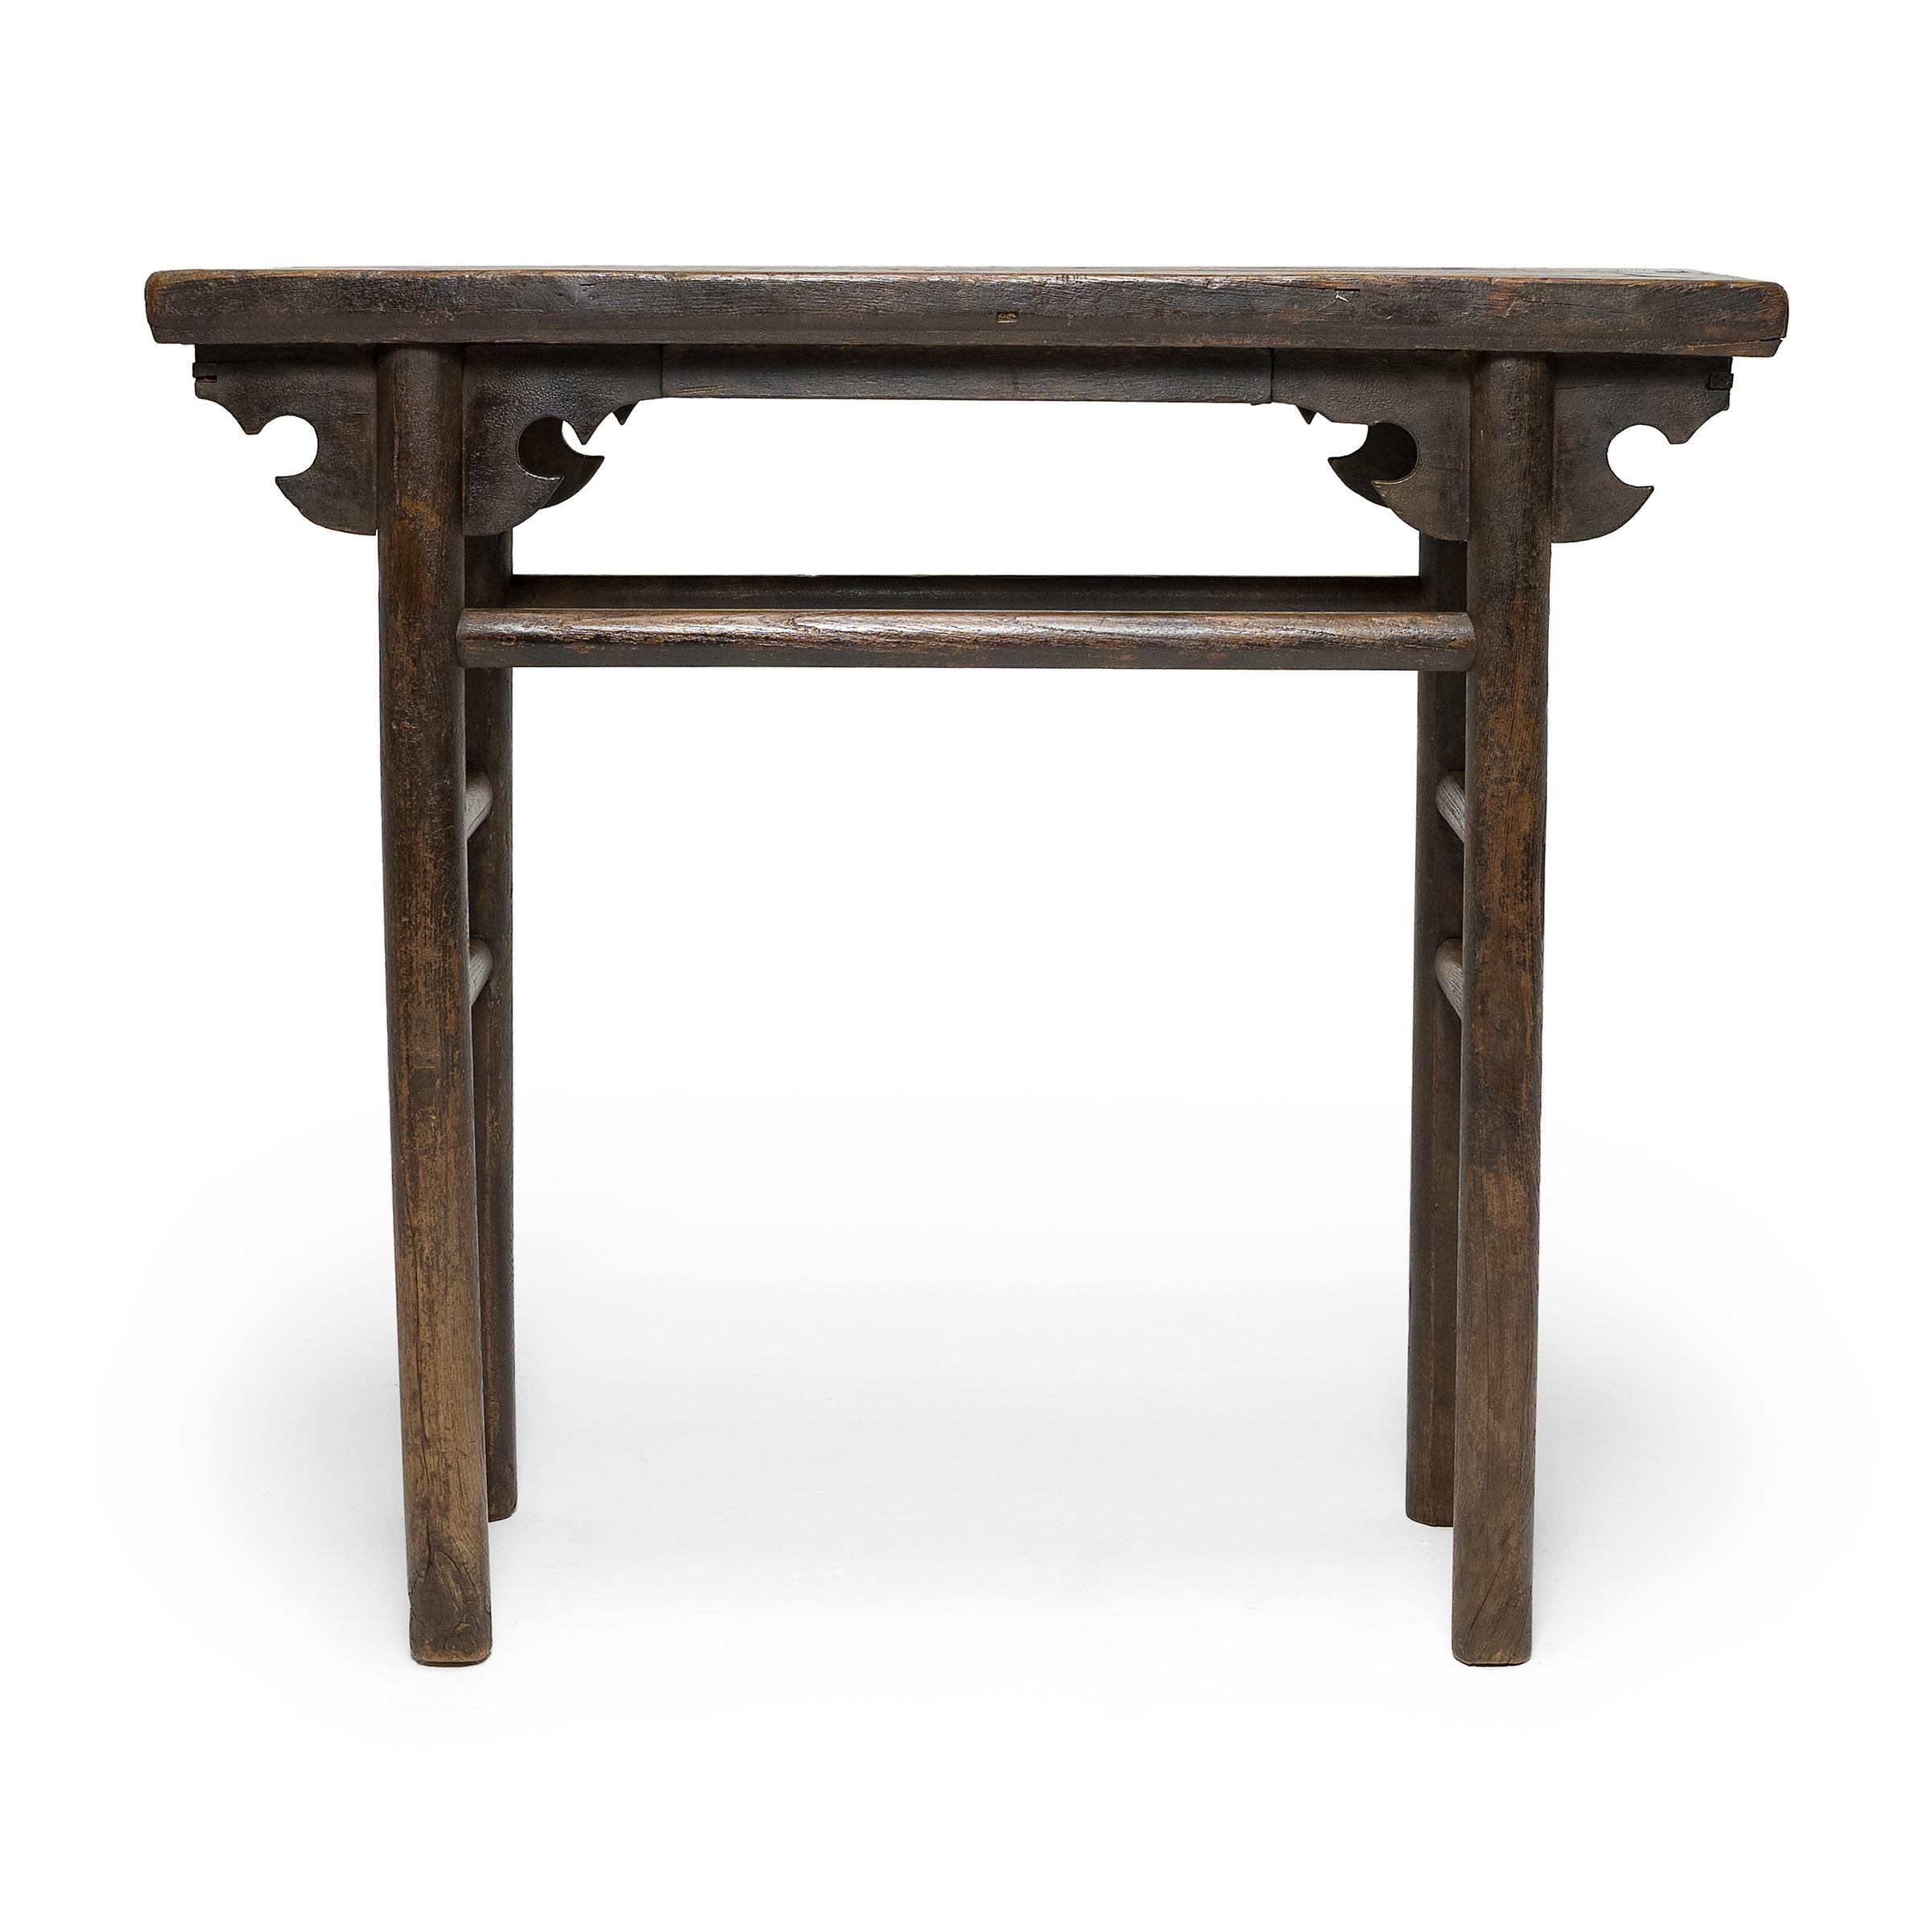 Made for sharing and offering wine and spirits, this small table once gathered together convivial imbibers who engaged in group toasts and robust consumption. Dated to the 19th century, the table is crafted of elm with mortise-and-tenon joinery and